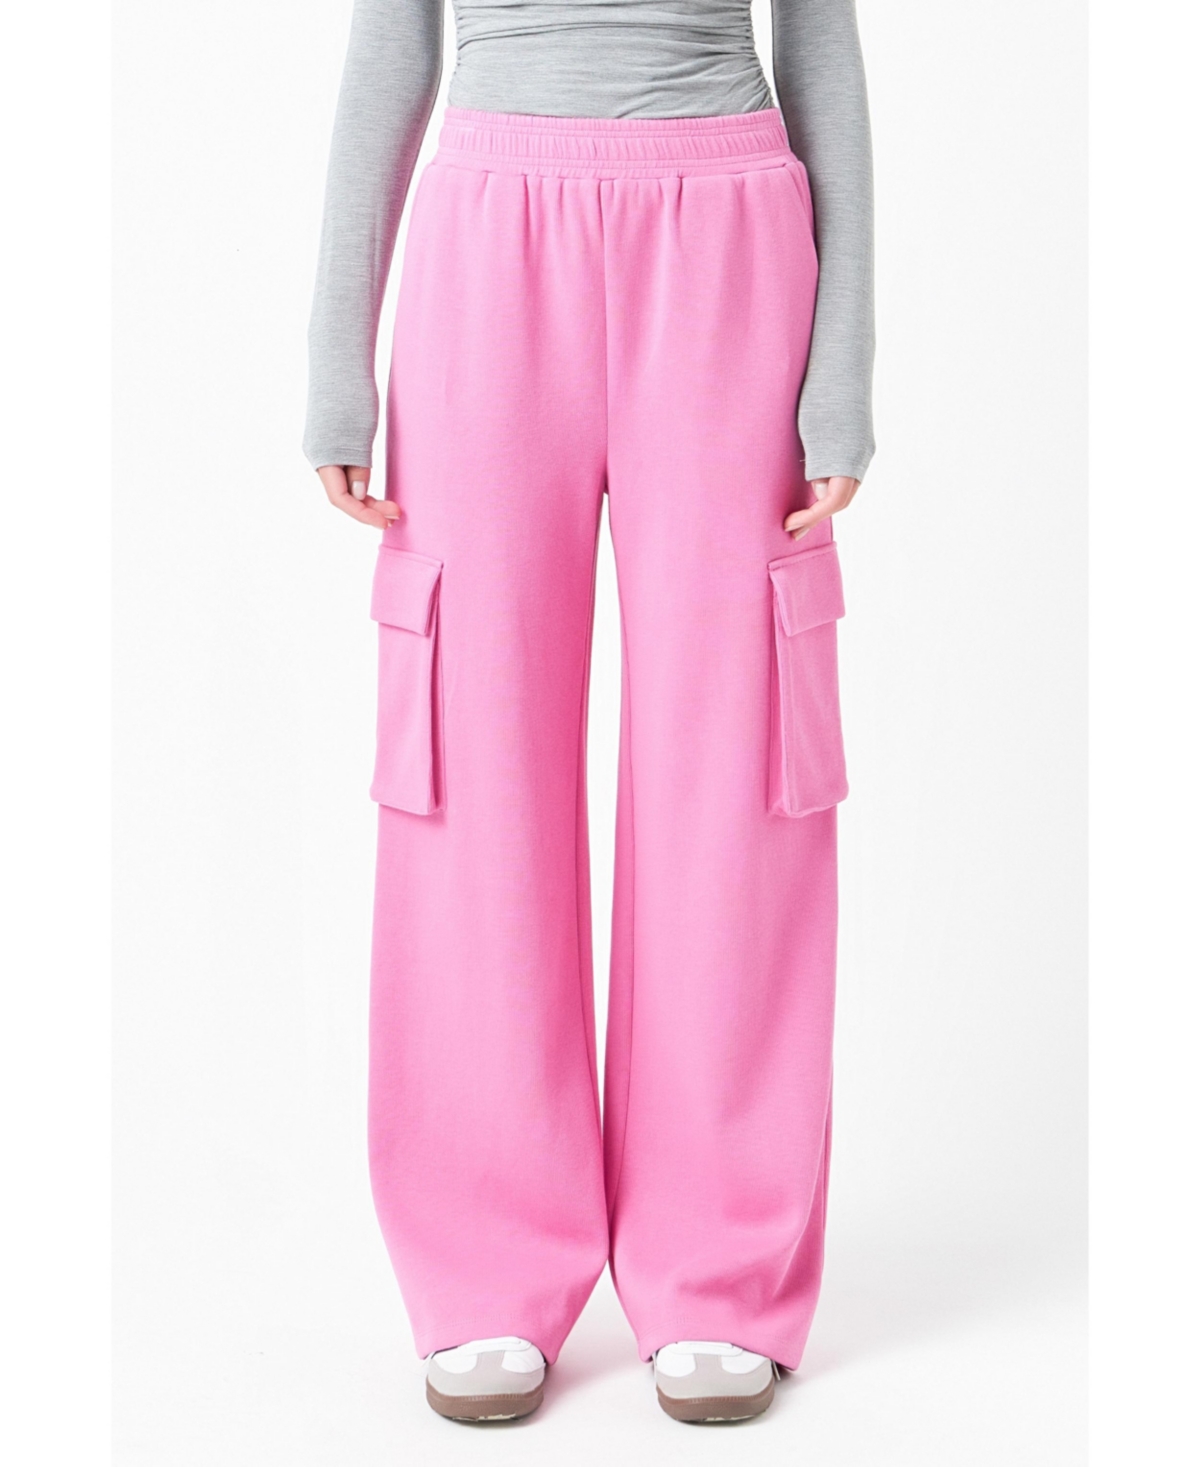 Women's Wide Knit Pants with Pockets - Pink